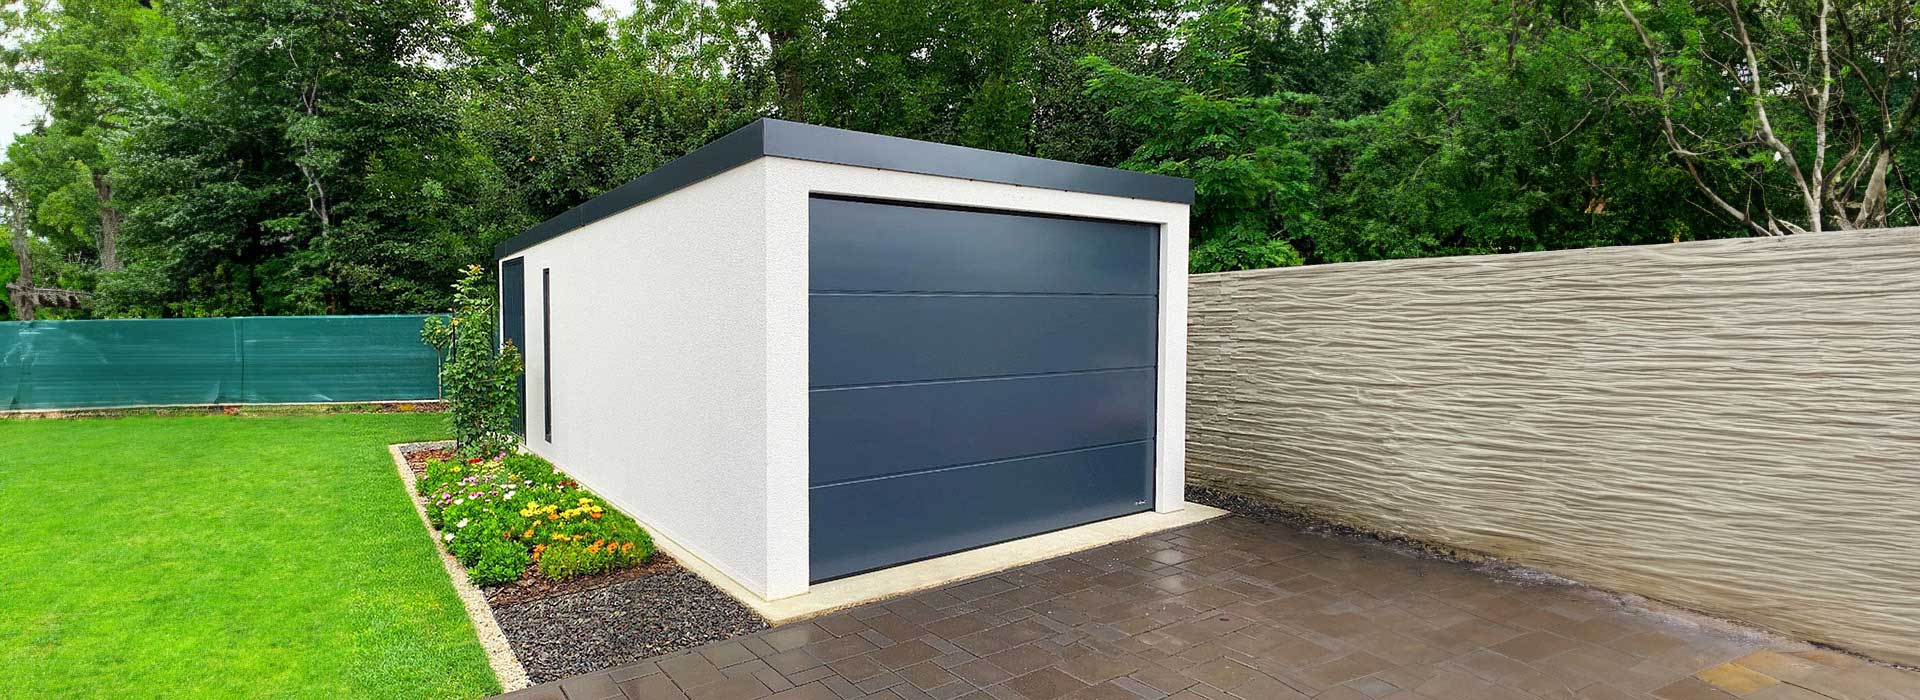 Garages for cars, motorbikes and garden tools, storage garages